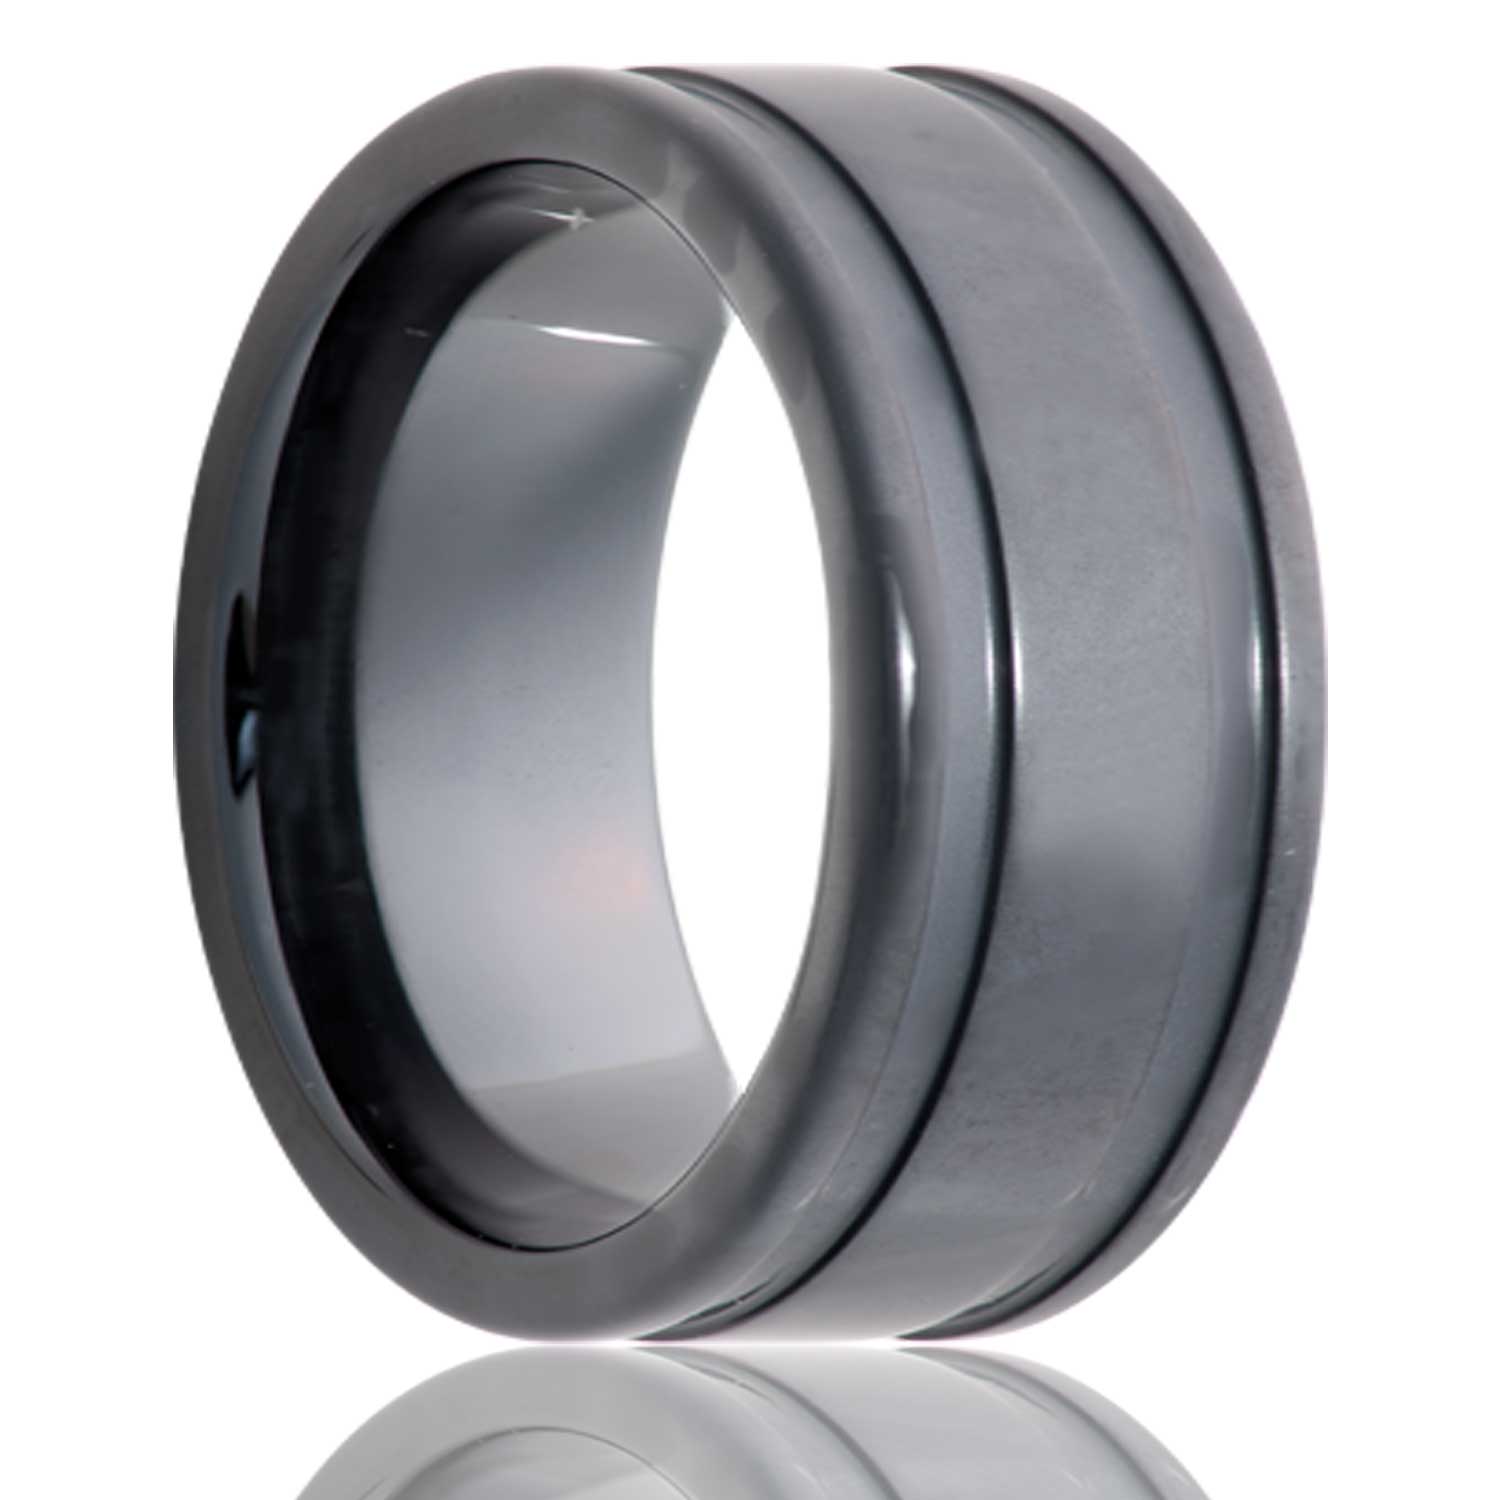 A sandblasted dual grooved black ceramic wedding band displayed on a neutral white background.